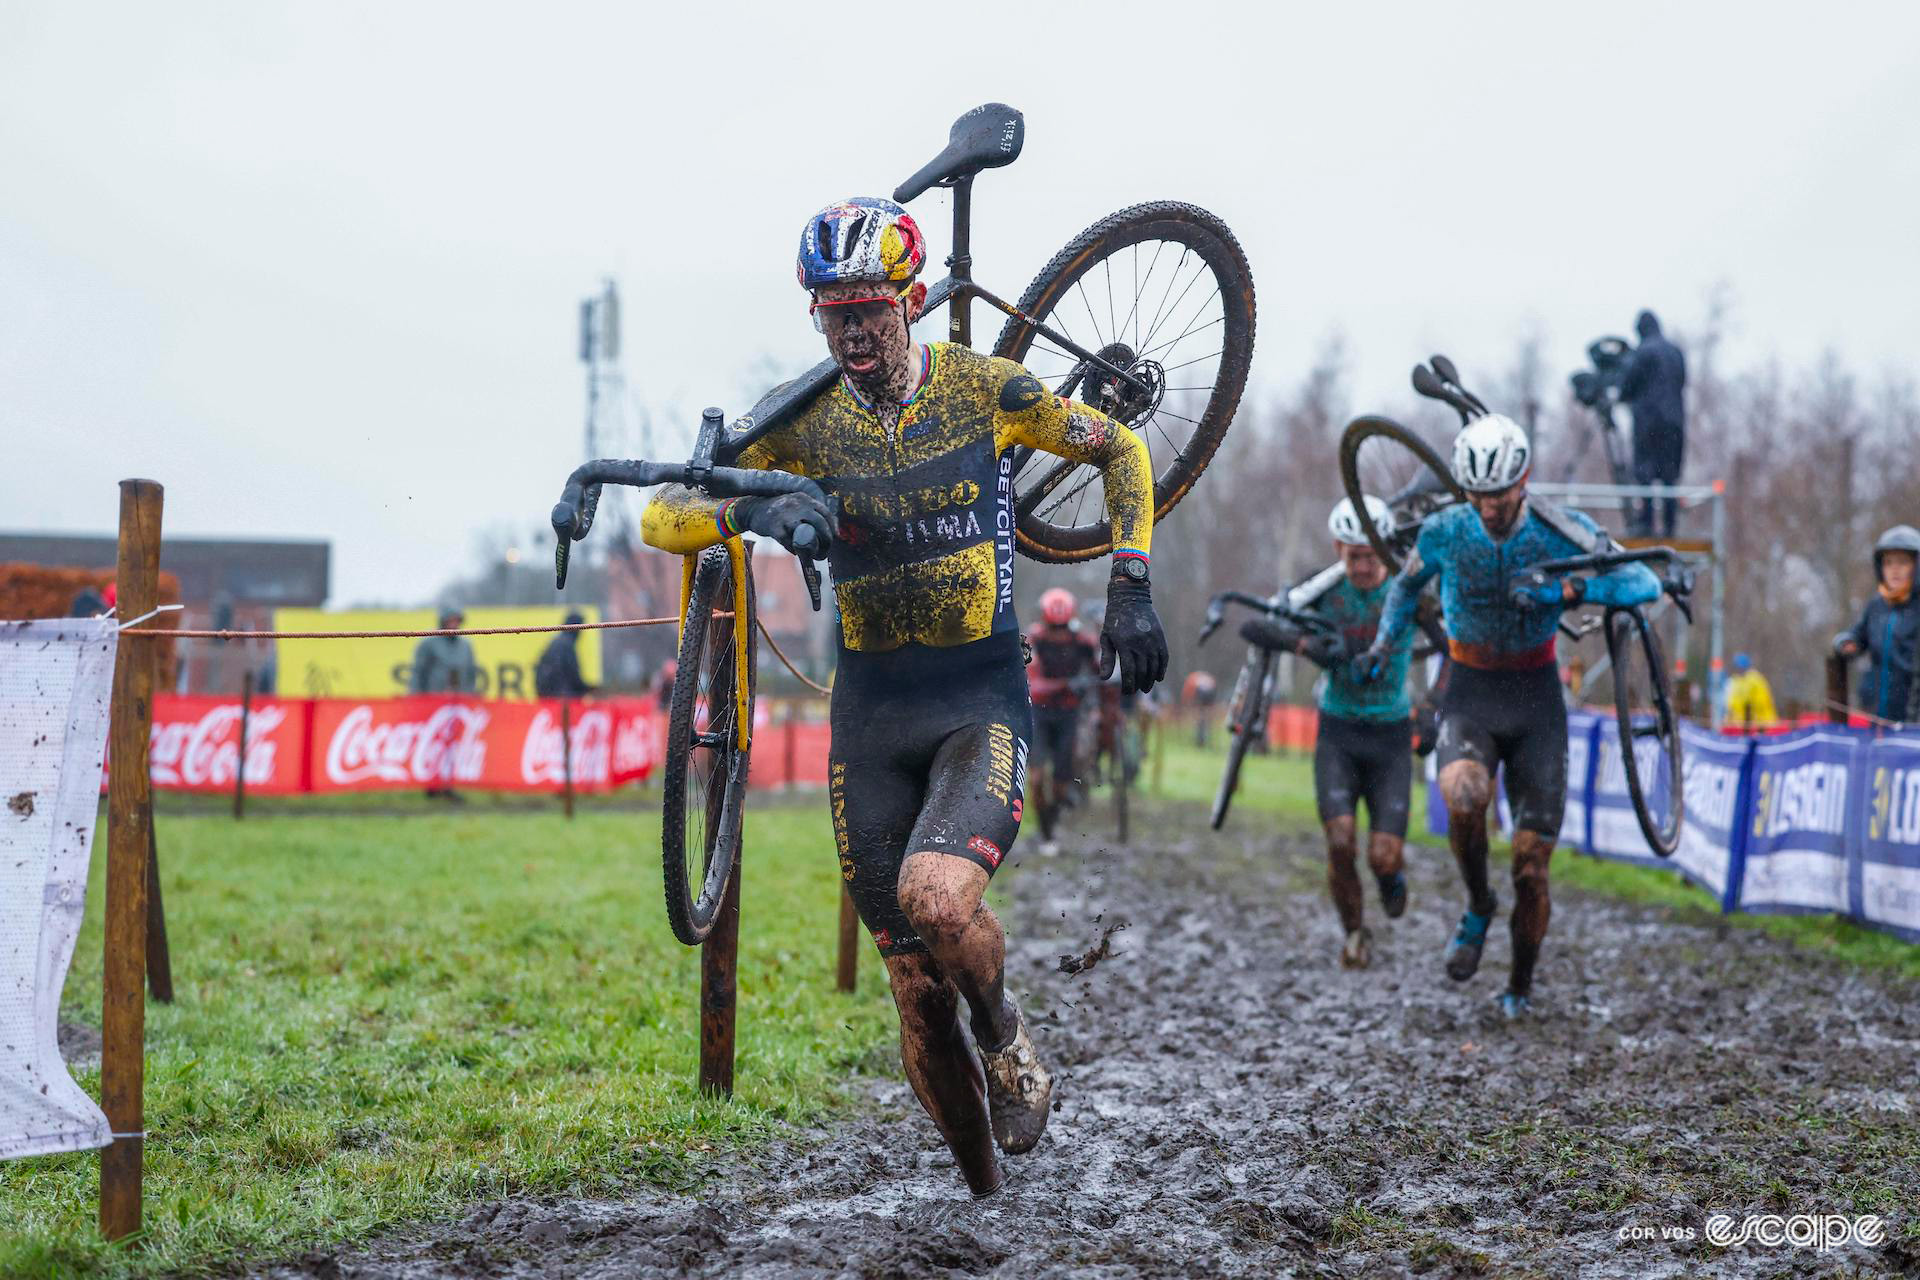 Wout van Aert during a very wet and muddy Exact Cross Essen, Jens Adams chasing in the background.